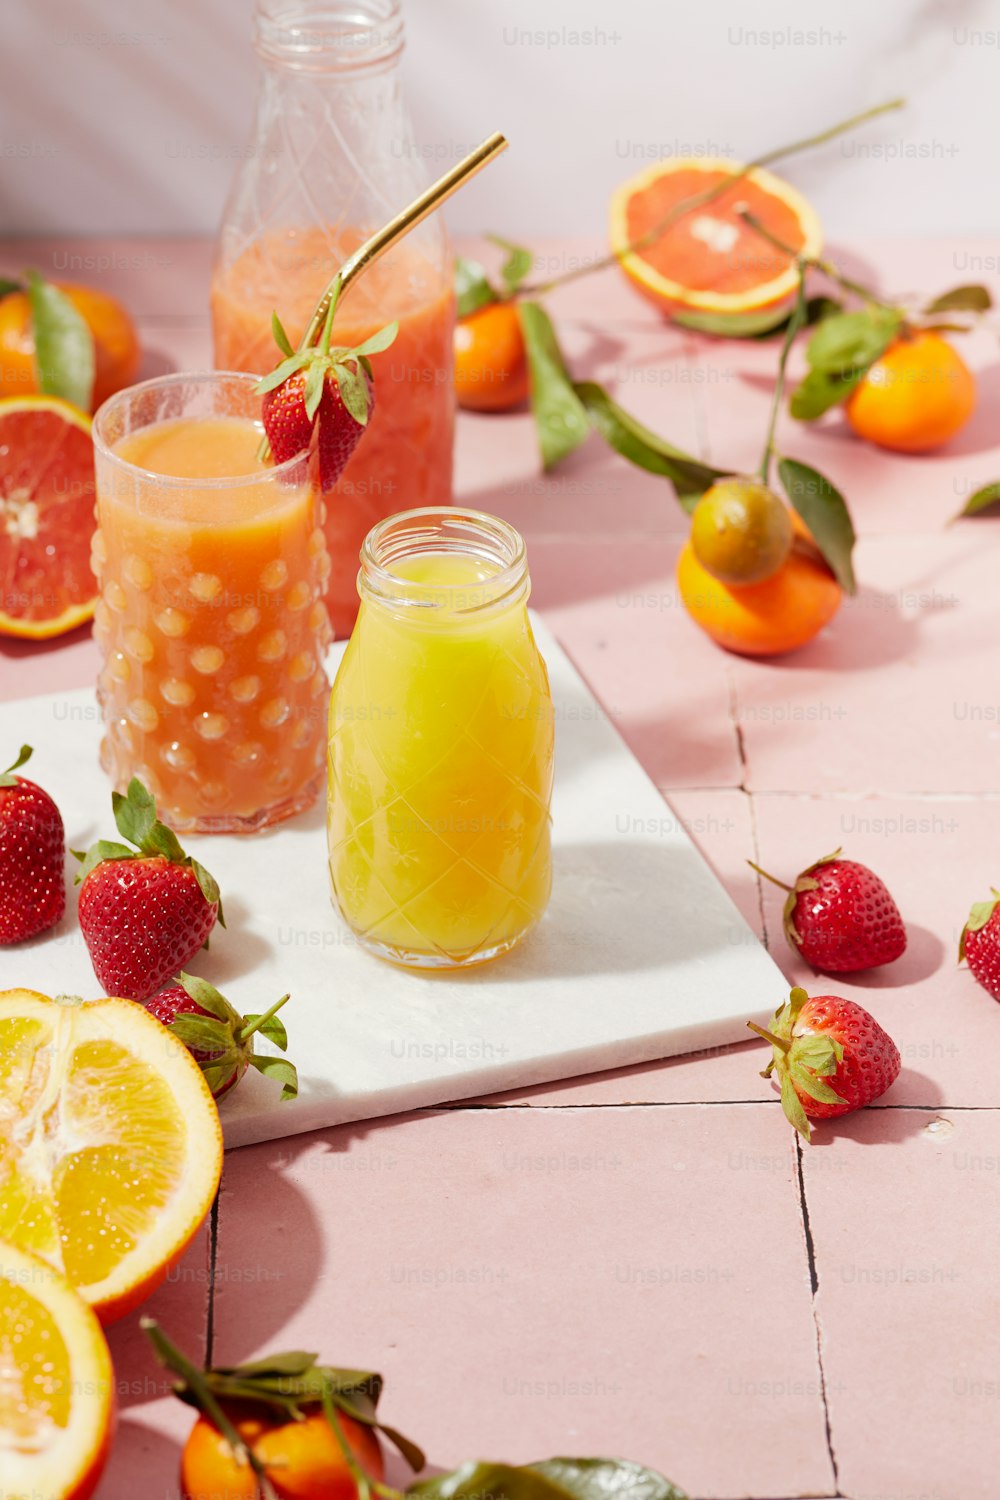 a table topped with oranges, strawberries and a jar of liquid